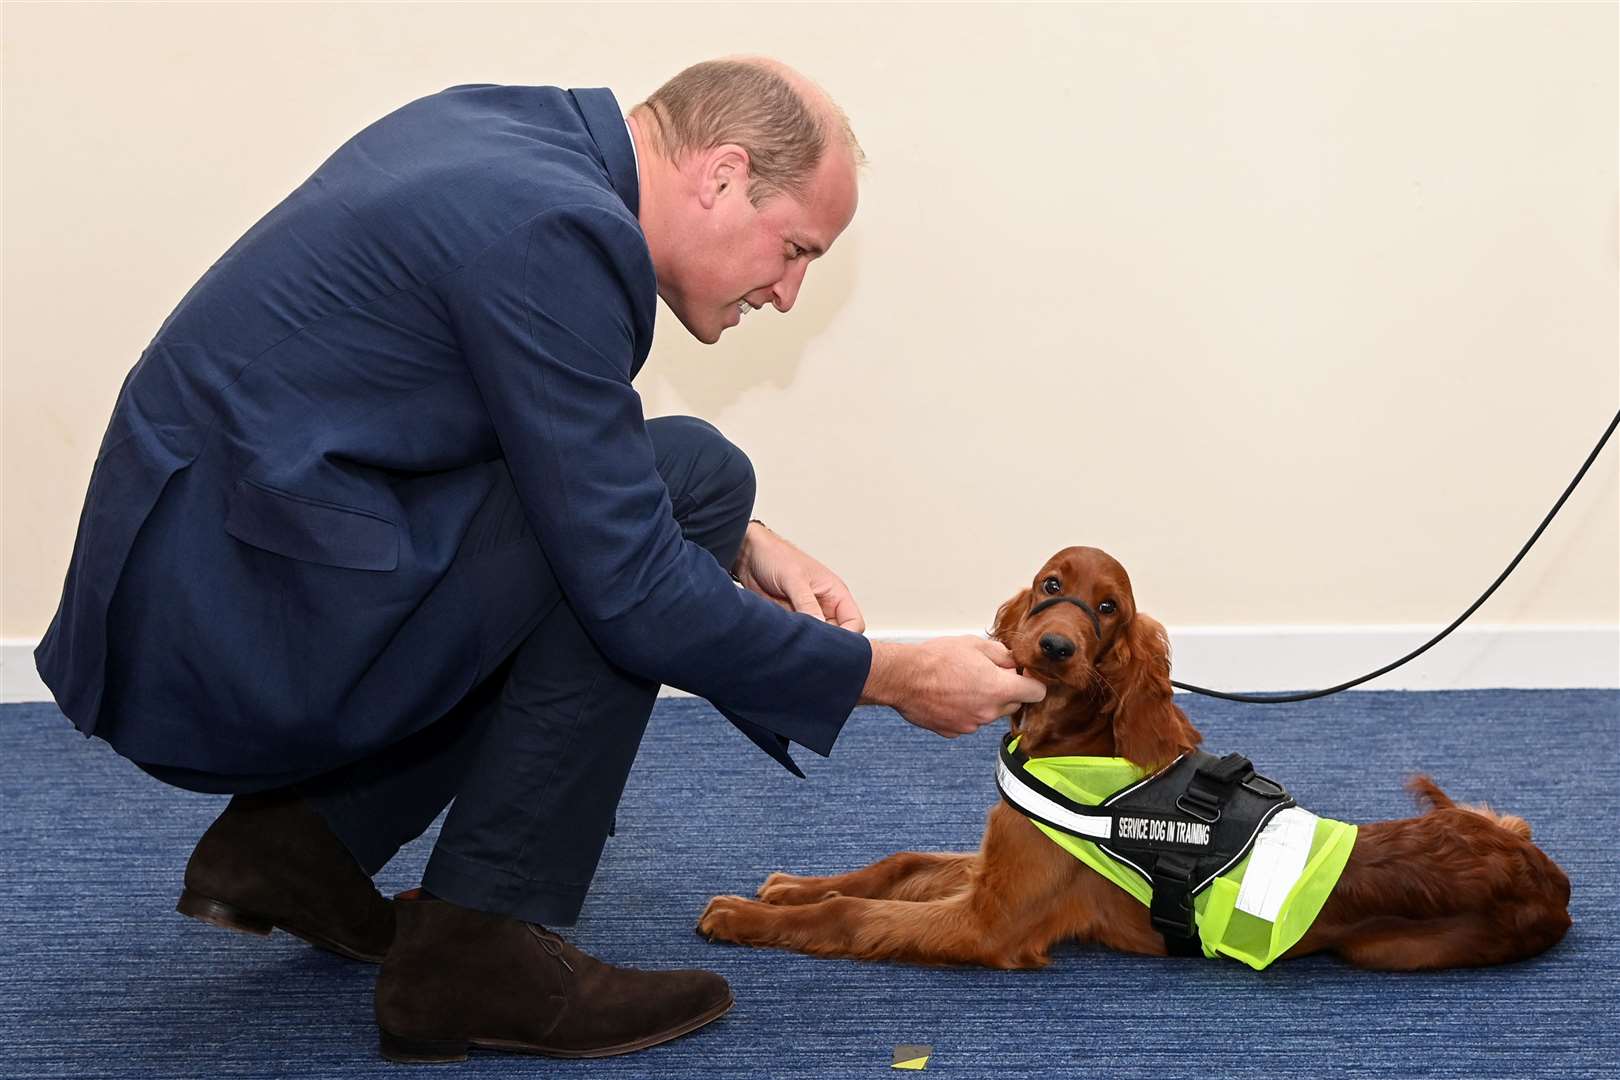 The Duke of Cambridge meets five-month-old Irish setter Tara, who has been trained to provide comfort to those suffering from post-traumatic stress disorder, during his visit to the PSNI Police College in Belfast in September (Tim Rooke/PA)